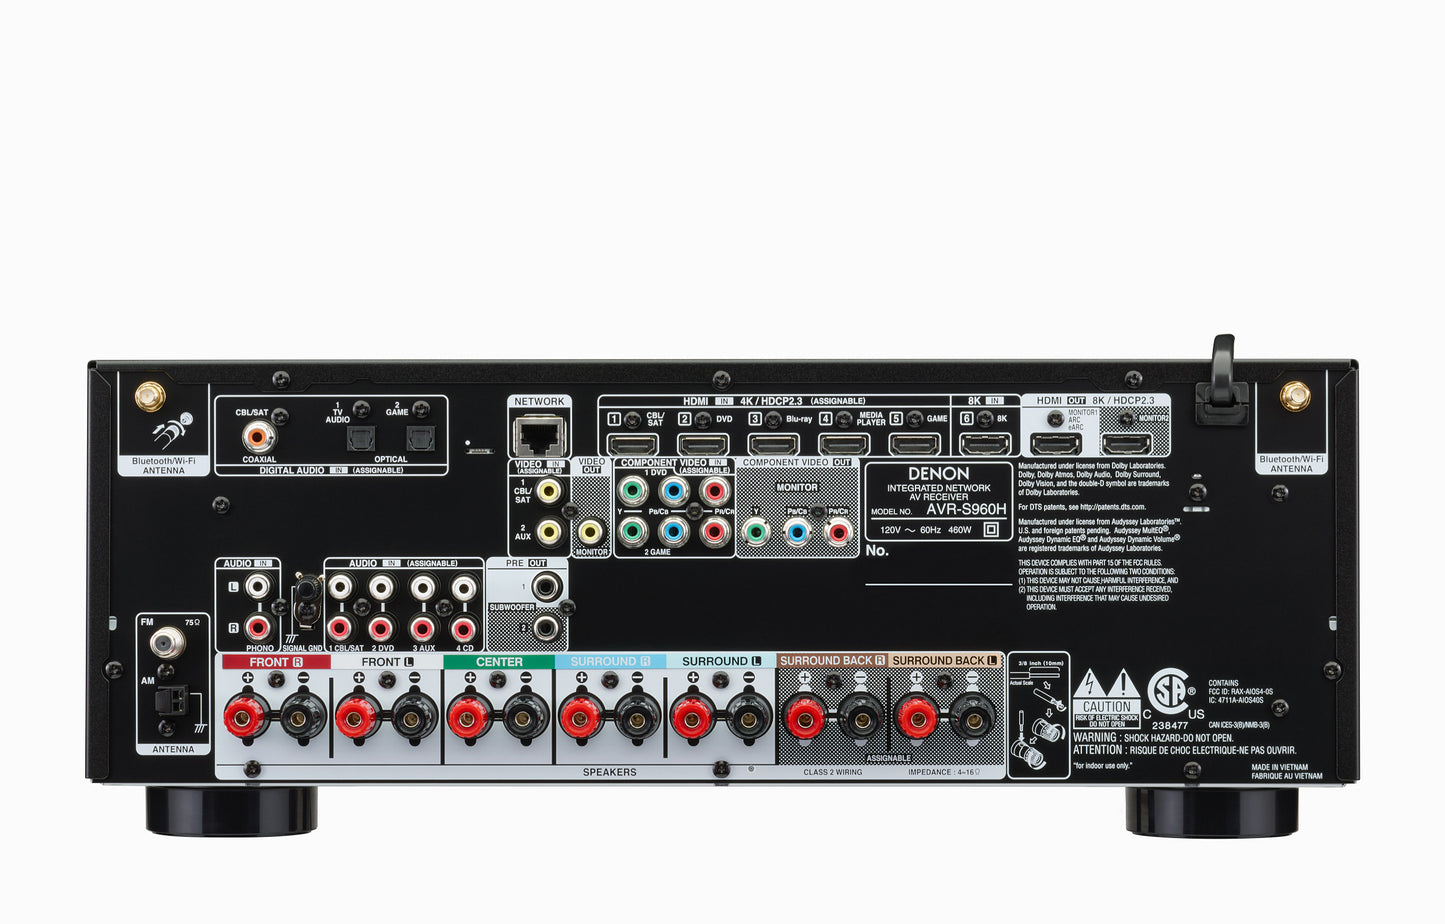 DENON AVR-S960H (2020 Model) 7.2ch 8K AV Receiver with 3D Audio, Voice Control and HEOS® Built-in